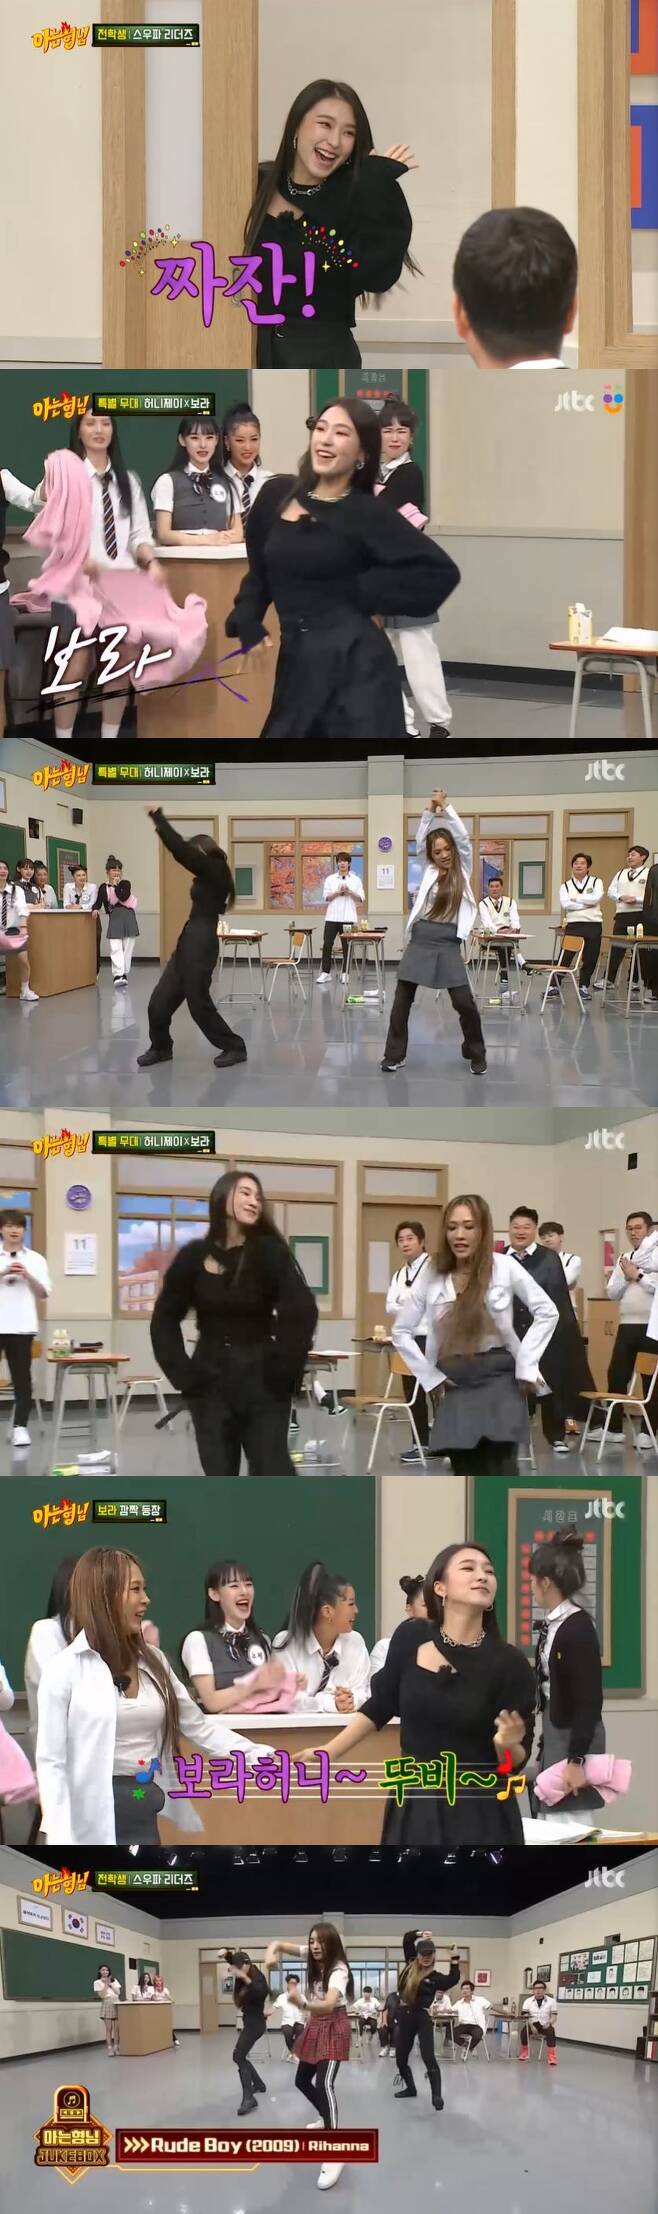 Seoul =) = Sistar Bora made a surprise appearance on Knowing Bros to defend his loyalty to the honey jay.Bora appeared in a surprise appearance with the honey jay at JTBC Knowing Bros broadcast on the afternoon of the 20th and danced with honey jay.Honey Jay had come out with me and backdancer three years ago when Bora appeared on Men on a Mission.Knowing Bros members said, When Bora came out, I was impressed with the honey jay, and honey jay thanked Lee for mentioning him.The members said, I want to see Bora, and suddenly Bora appeared, I wanted to see it.Appearing in black, Bora danced with her and Bora three years ago and received a hot applause.Honey Jay said, Bora said that she was coming in black on purpose, and she came in black on purpose, so she said, No, I dressed pretty, but I came in black. I saw Swoopa too, I felt so good, and not only the falsehood but also the other dancers gave me a lot of wonderful performances, so I wanted to dance, he said. I have been dancing for a year, I am satisfied.Bora, who danced, soon left, saying, Today is the day of the dancers and dancers, I will come to enter next time.